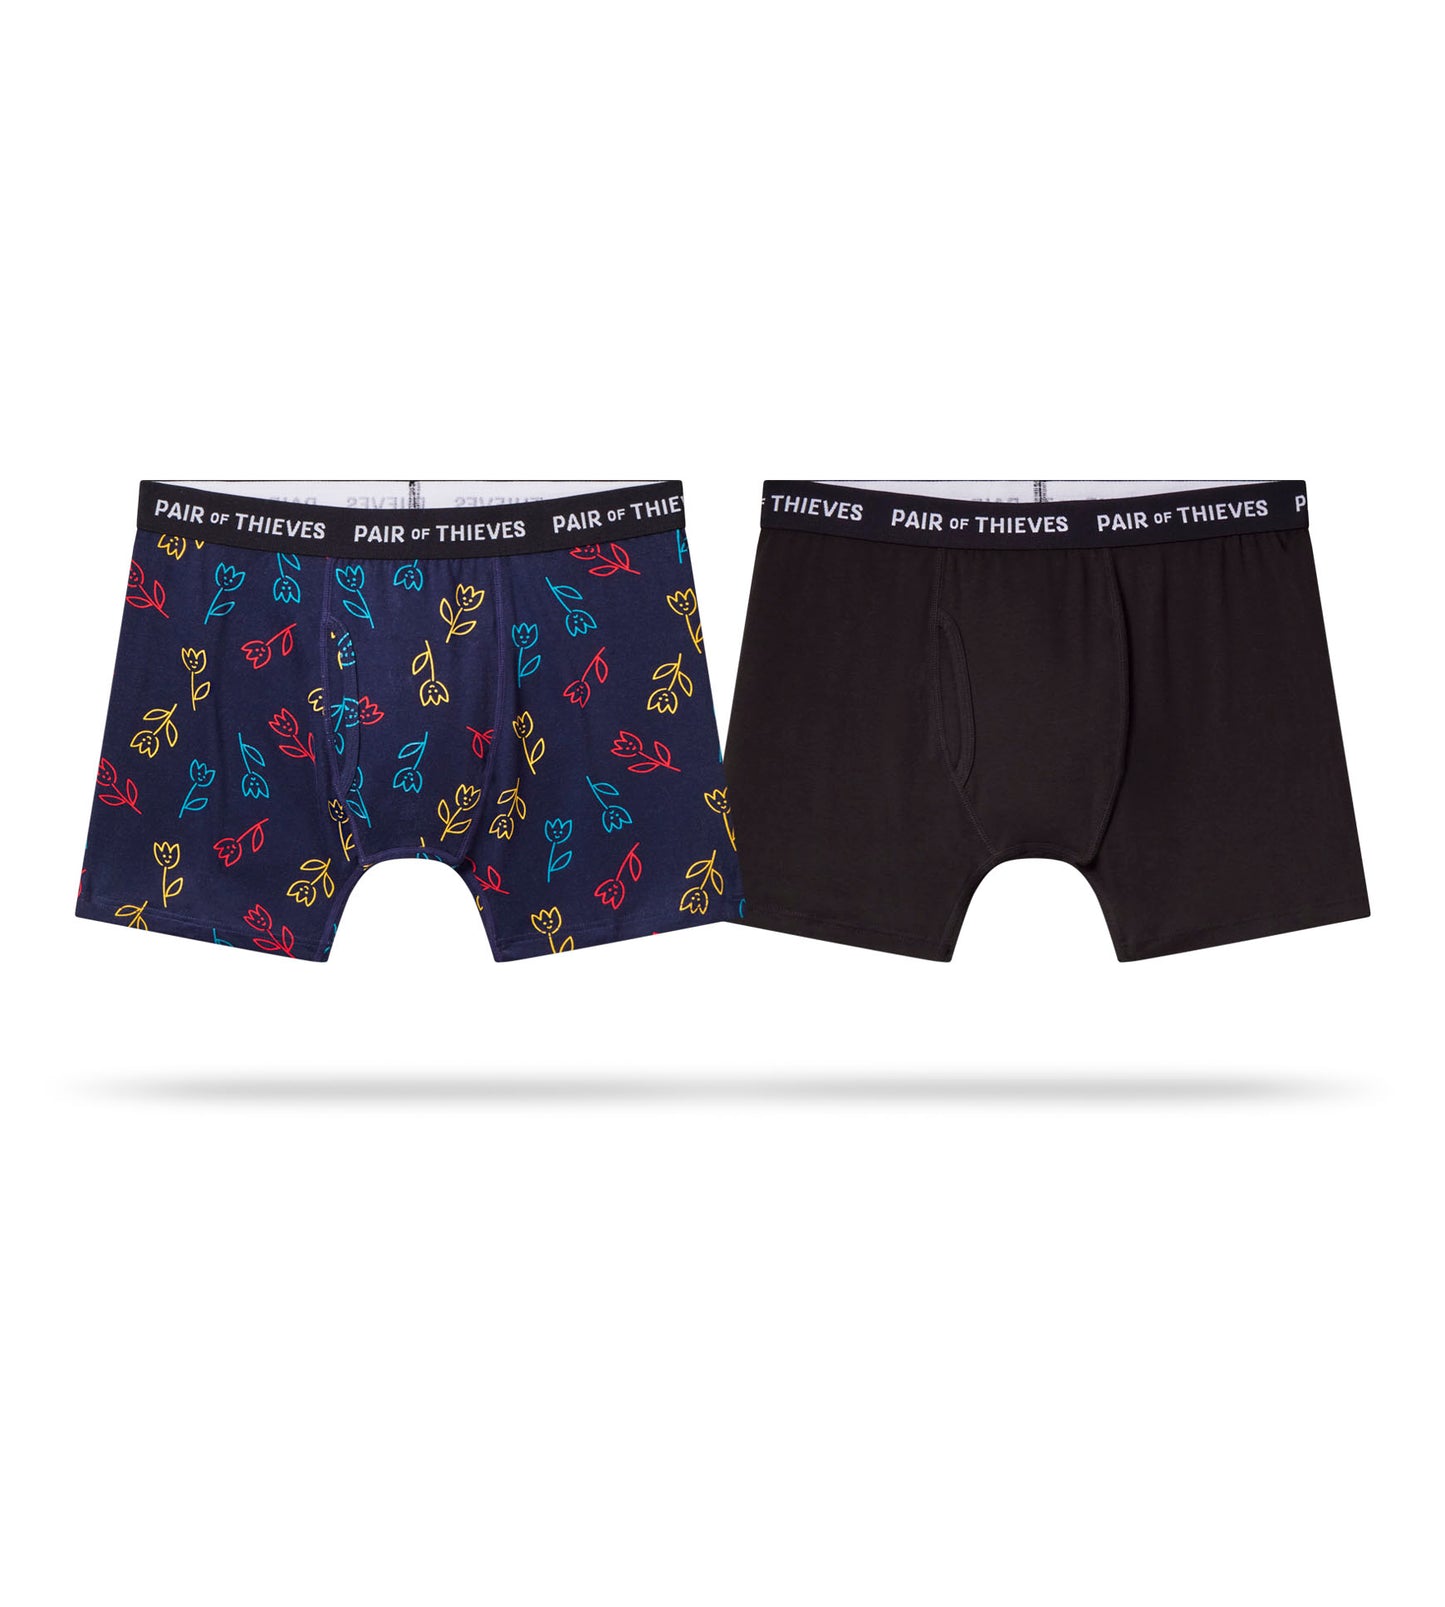 SuperSoft Boxer Brief 2 Pack colors consists of Dark slate gray, Gains boro, Gray, Black, Indian red, Light sea green, Dark slate gray, Saddle brown, Burly wood